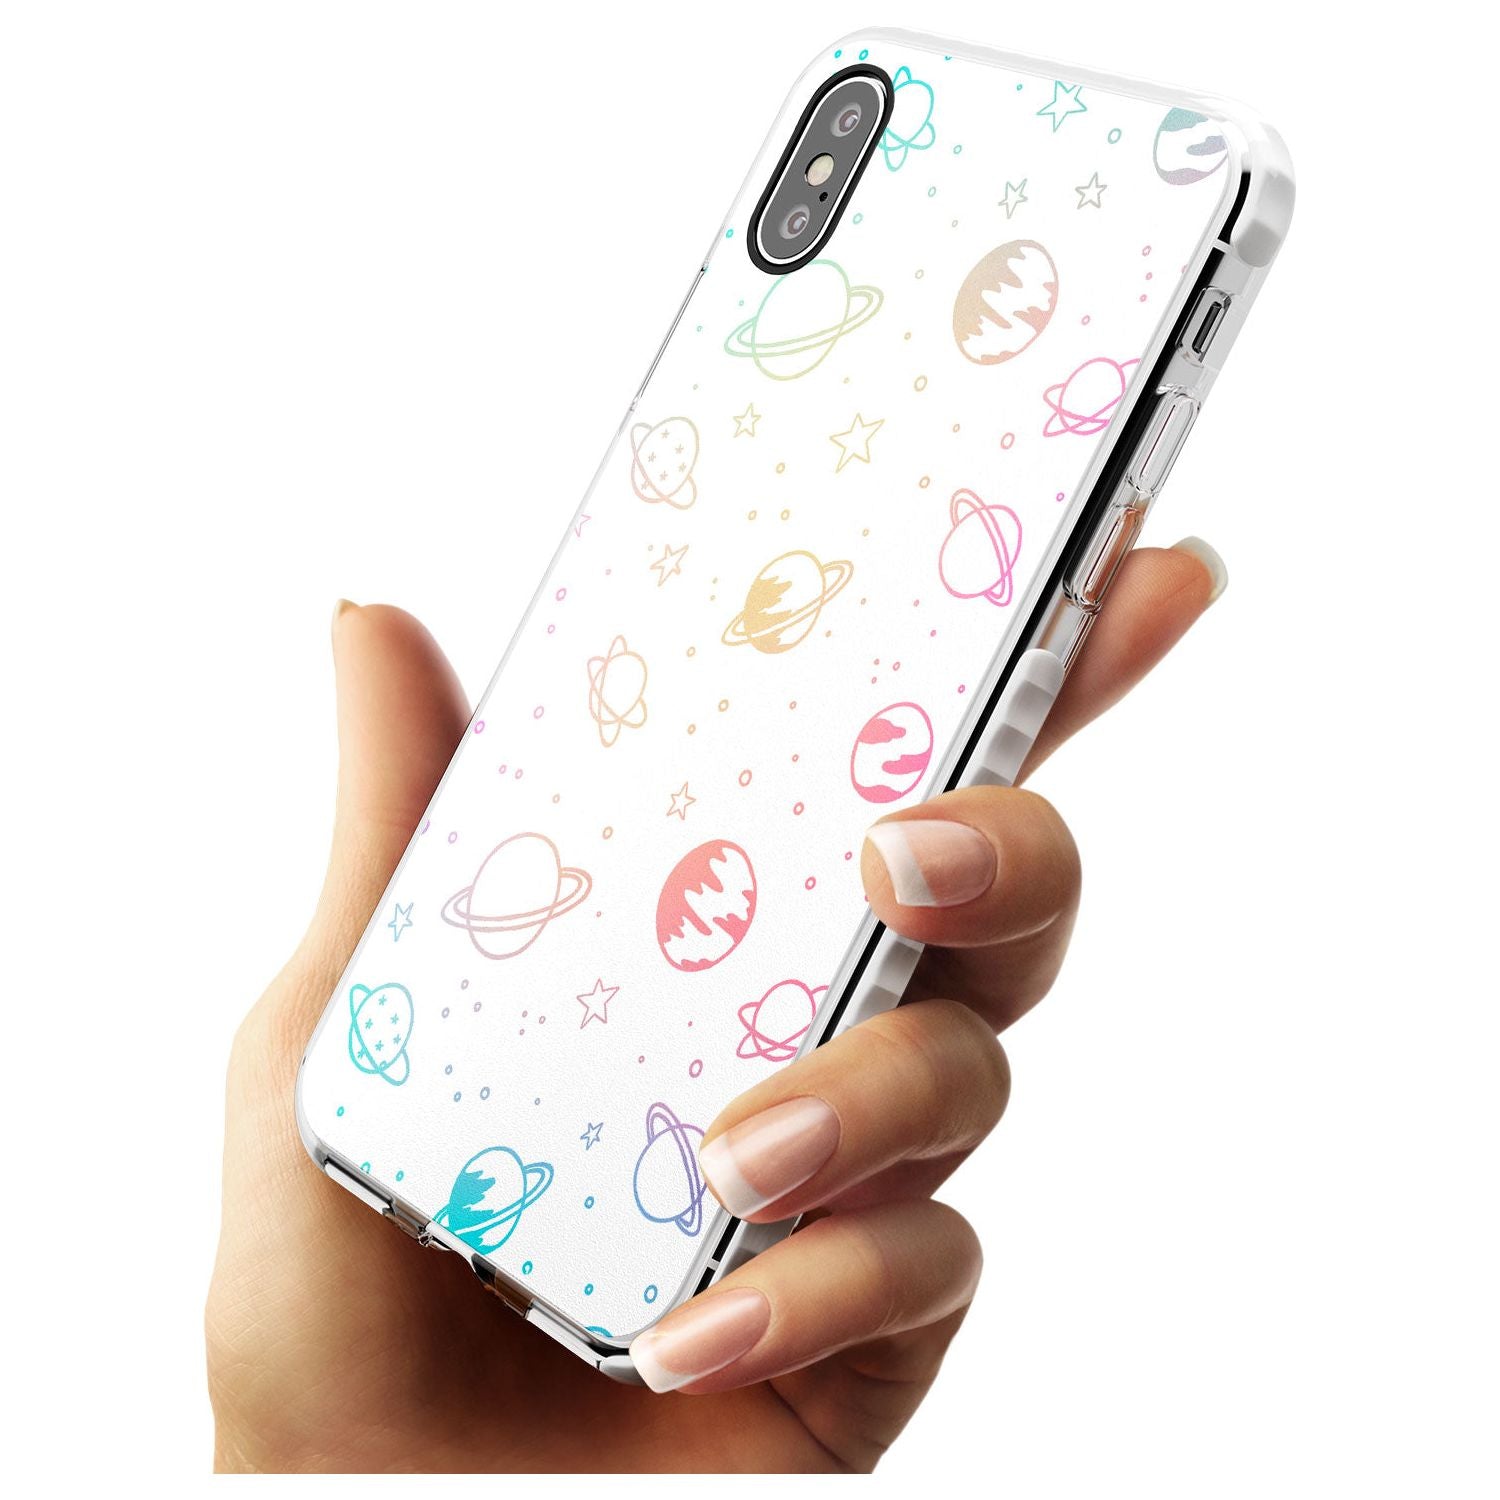 Outer Space Outlines: Pastels on White Slim TPU Phone Case Warehouse X XS Max XR